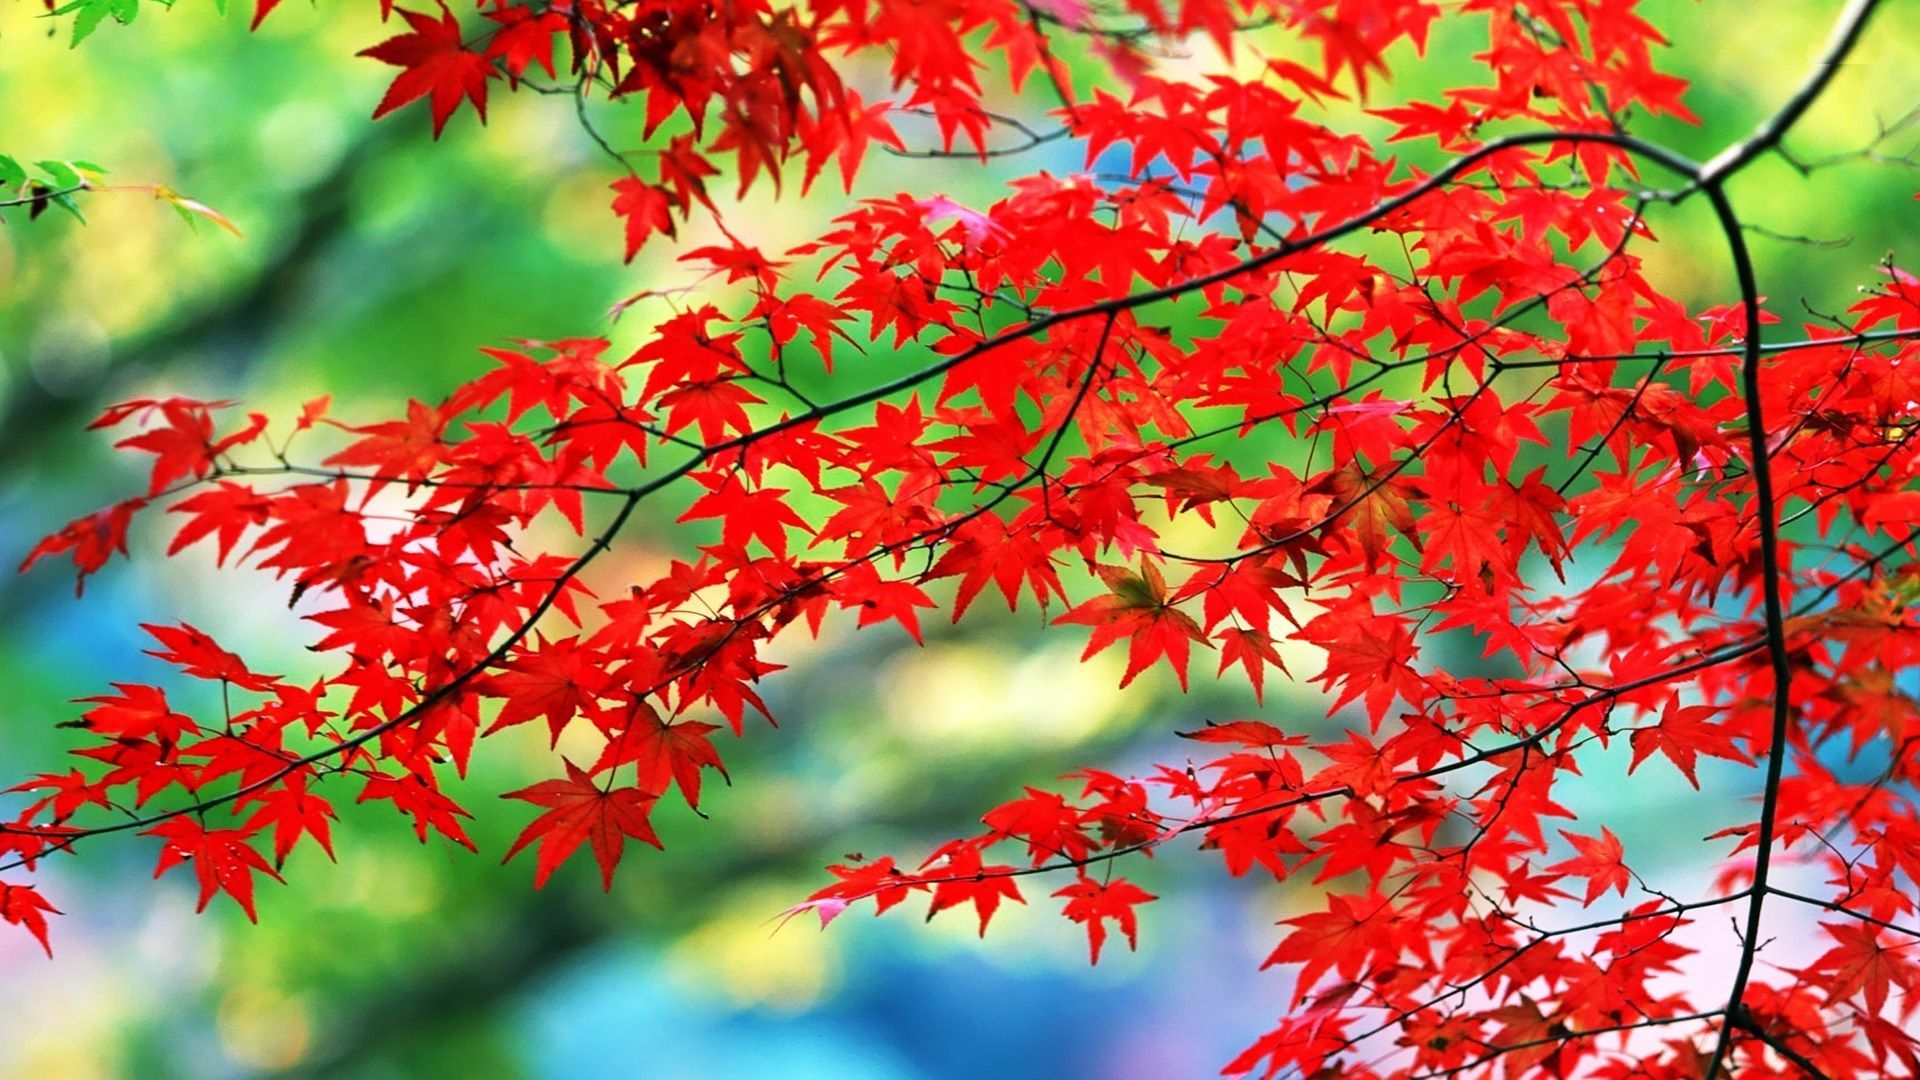 Red Leaf HD Wallpaper, Red Leaf Images, New Wallpapers